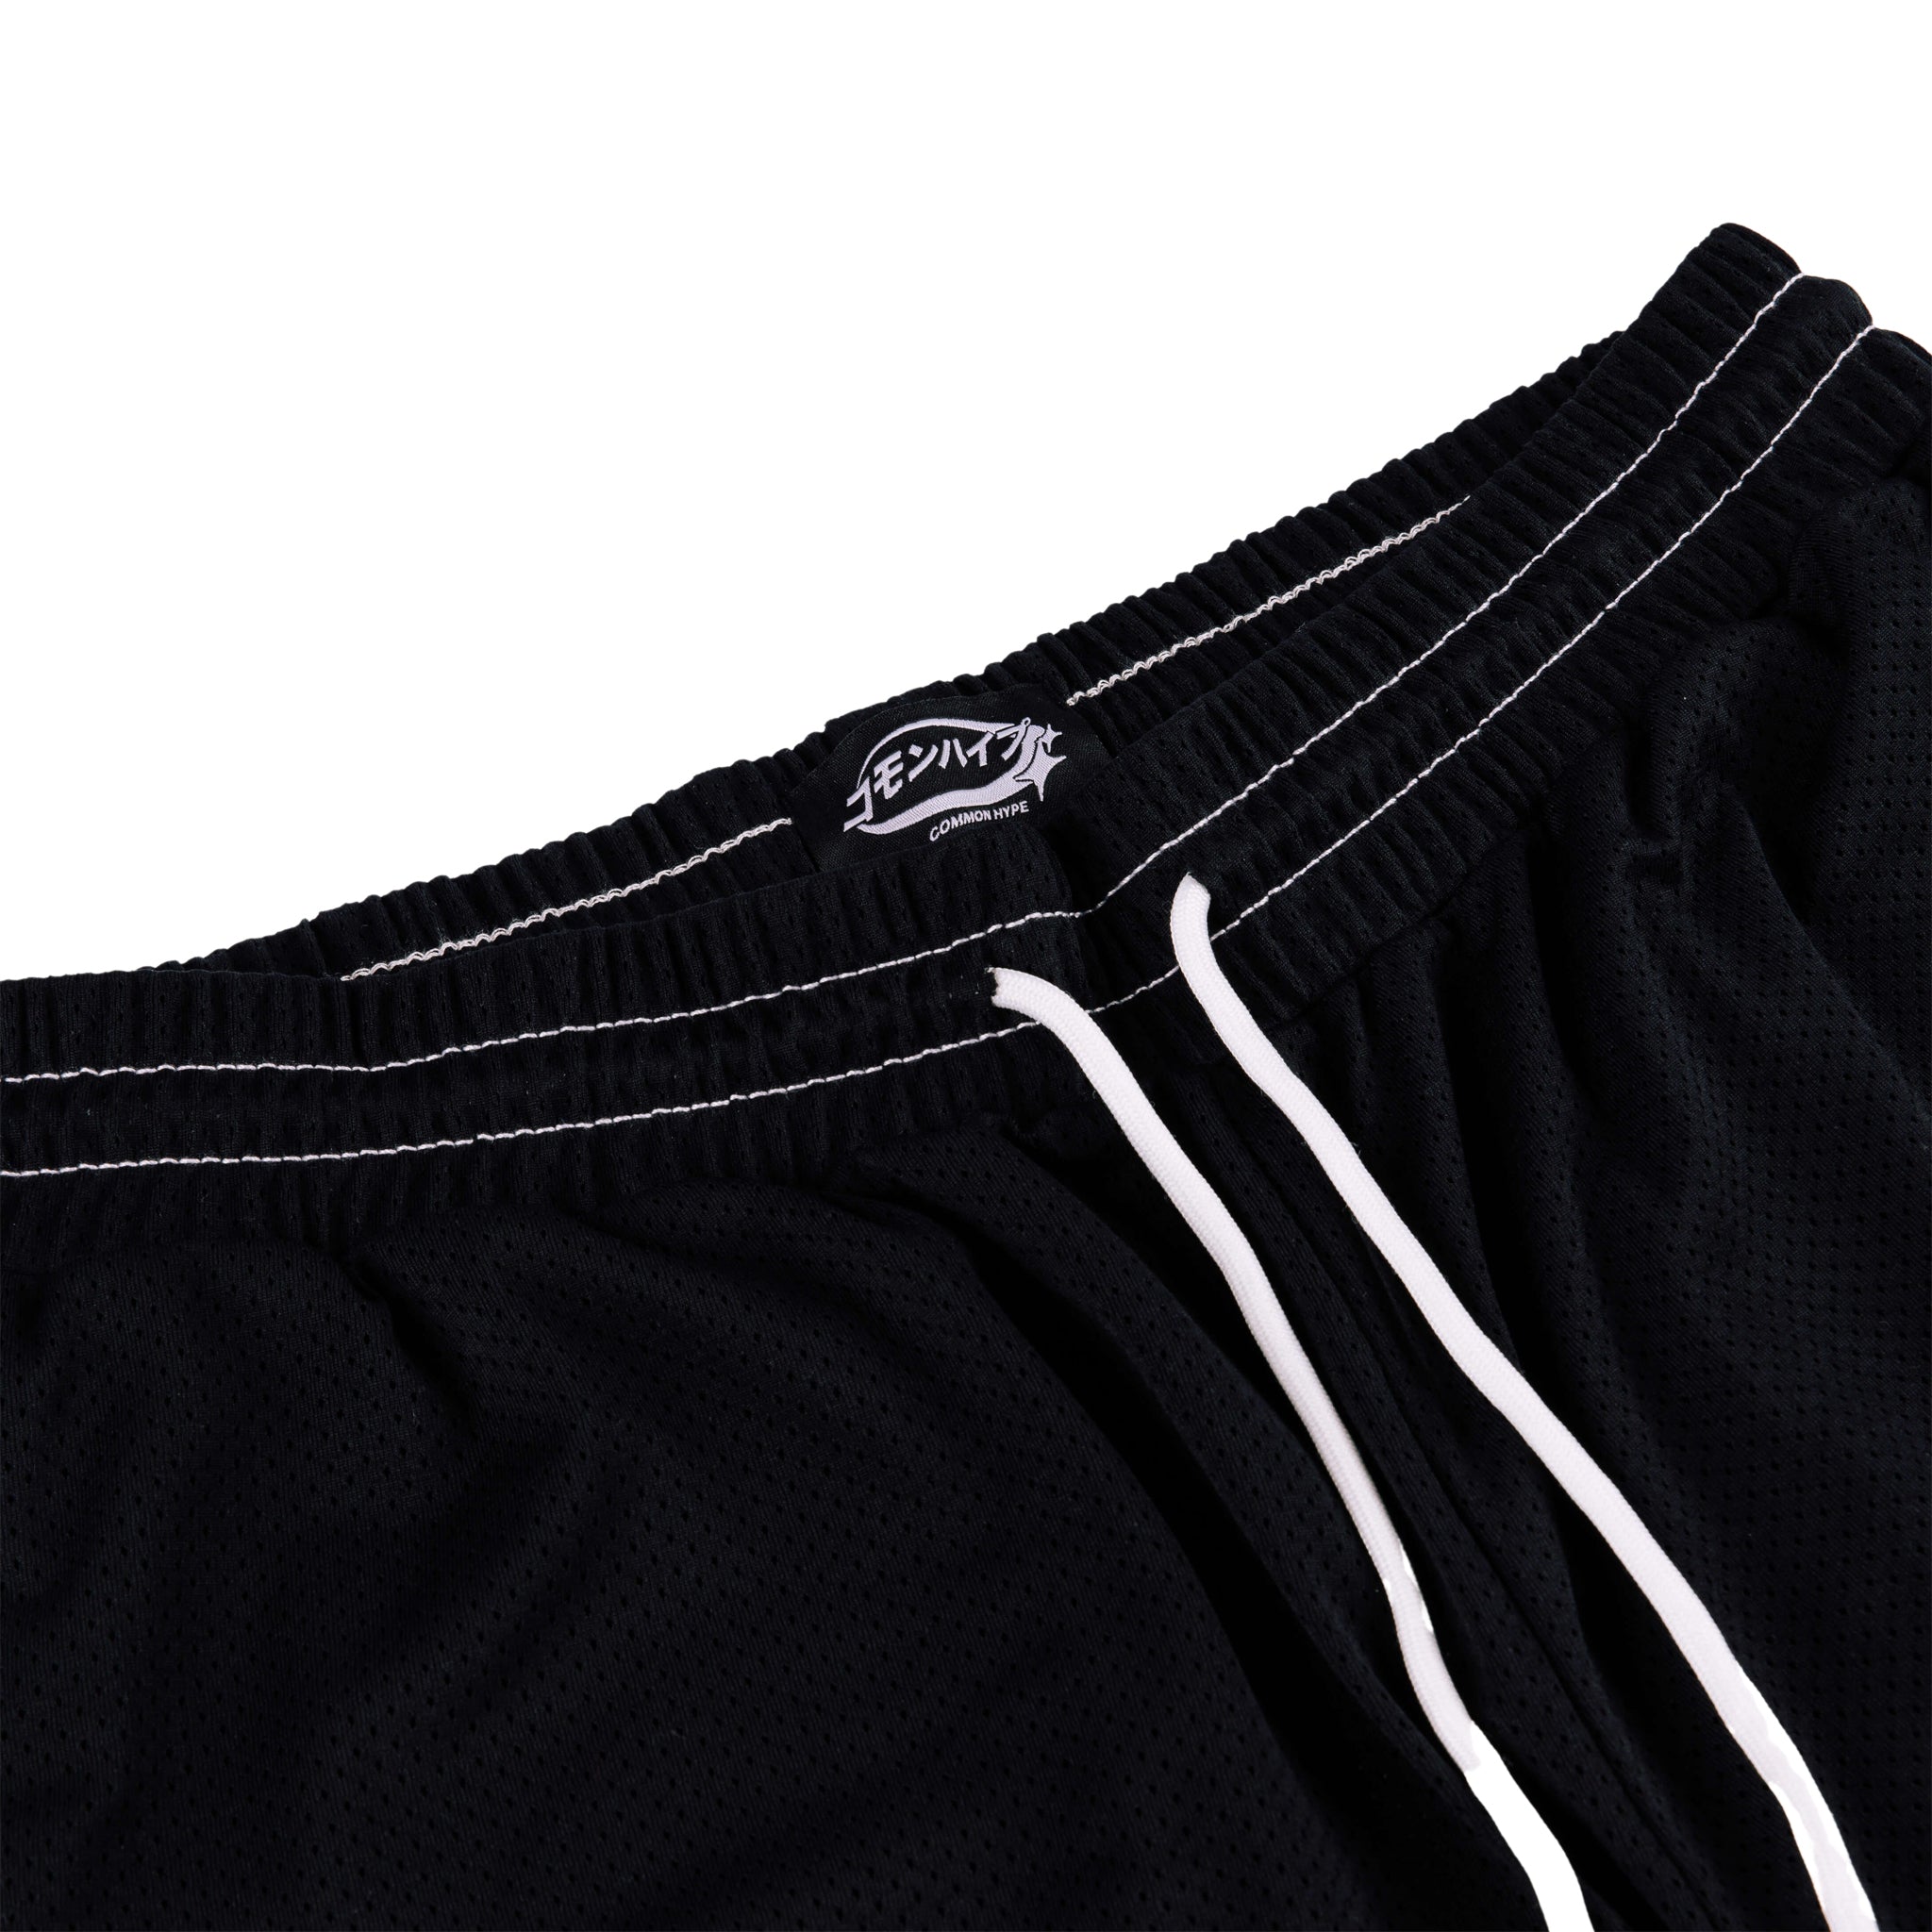 Common Hype Black Contrast Stitching Mesh Short